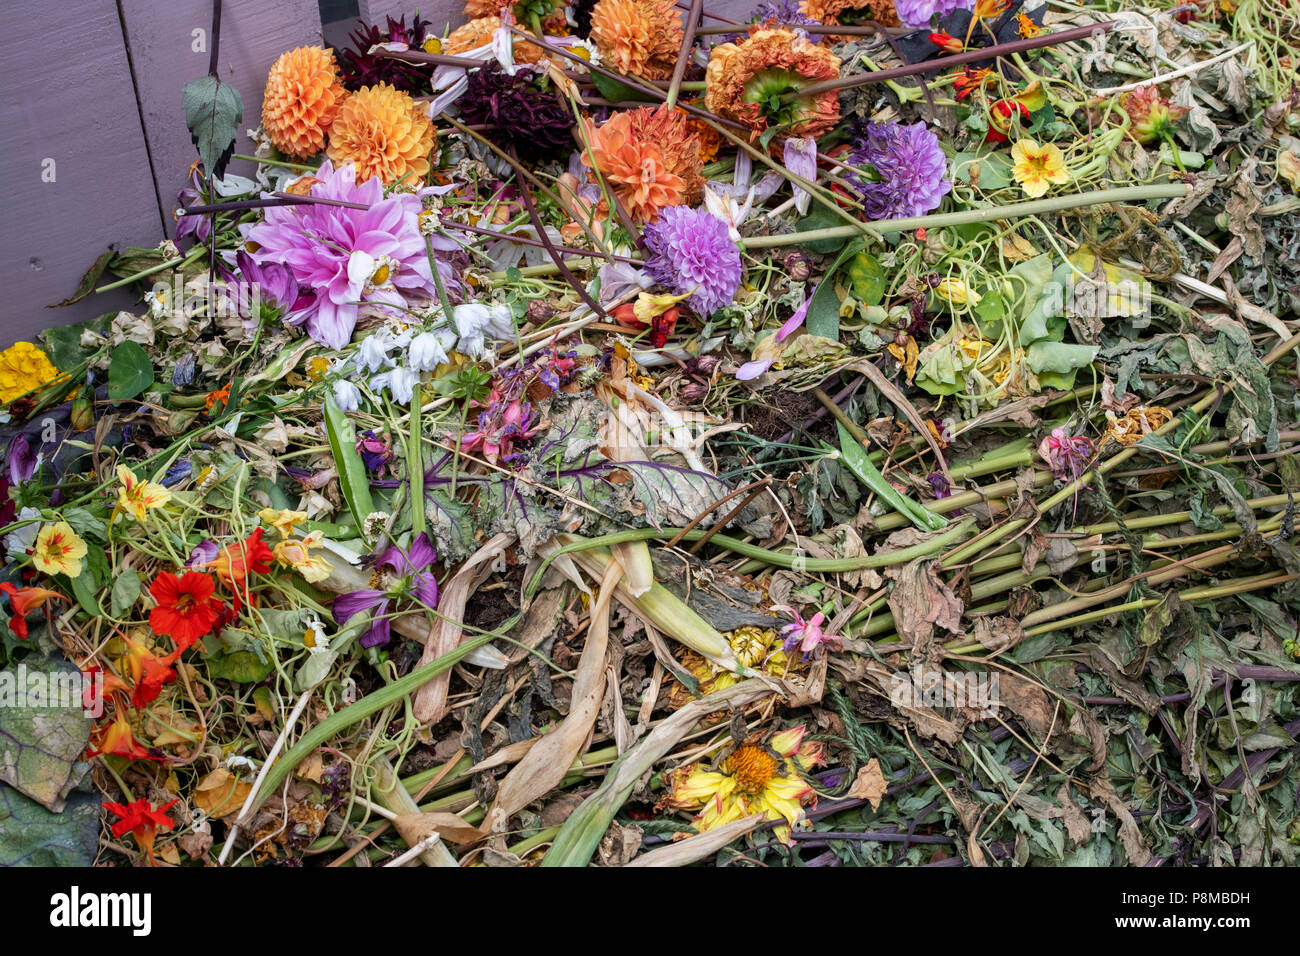 Garden waste on a compost heap made of pallets at a flower show. UK Stock Photo